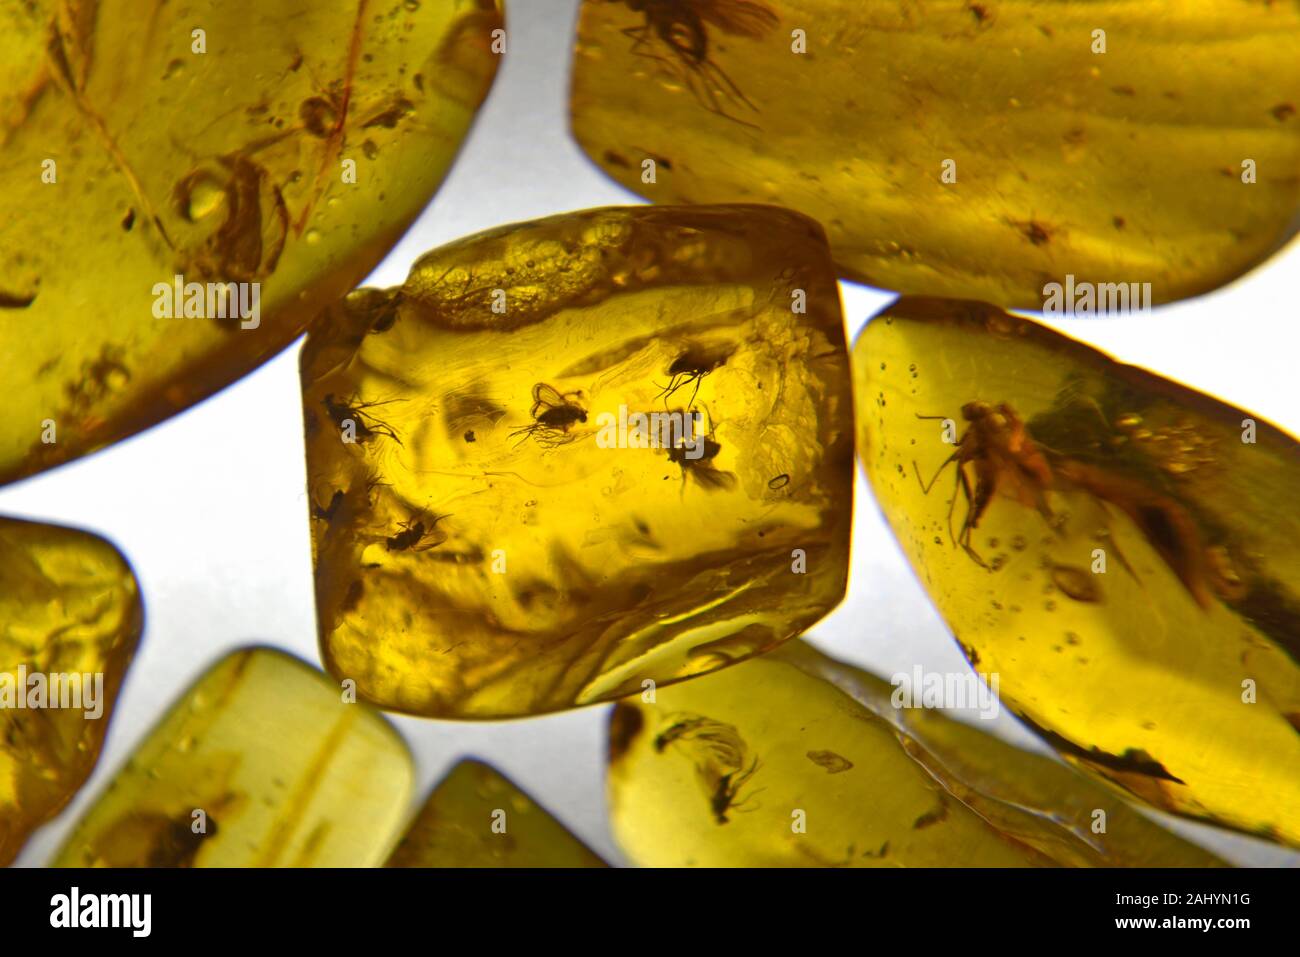 Baltic amber with inclusions of insects, Nida, Curonian Spit, Lithuania, Baltic States, North Europe. Stock Photo